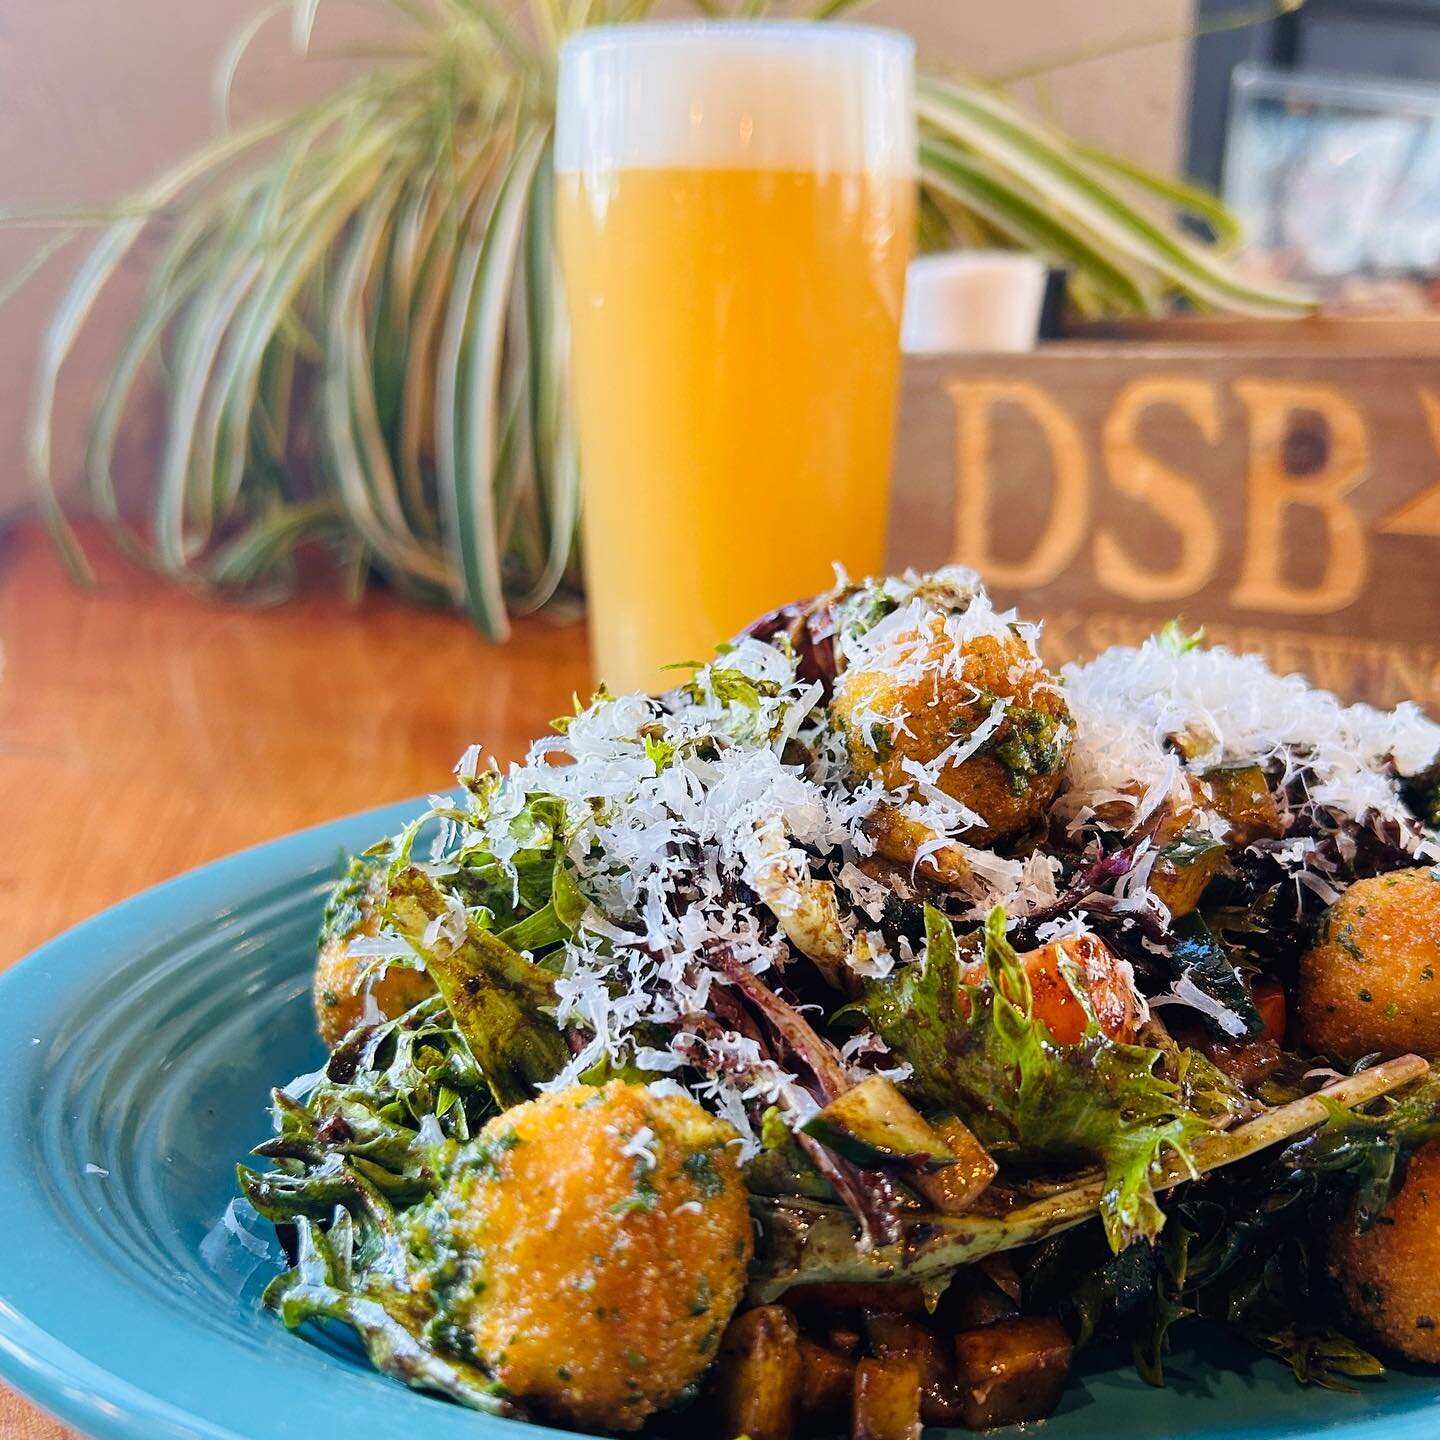 👨&zwj;🍳Atmosphere Kitchen specials👨&zwj;🍳

The sun is shining! 😎
Come hang at the beer garden and enjoy these specials and beautiful Winter wonderland views ❄️ 🏔️ 
 
Tacos 🌮 Short rib and shiitake, green pea guacamole, cabbage &amp; goat chees